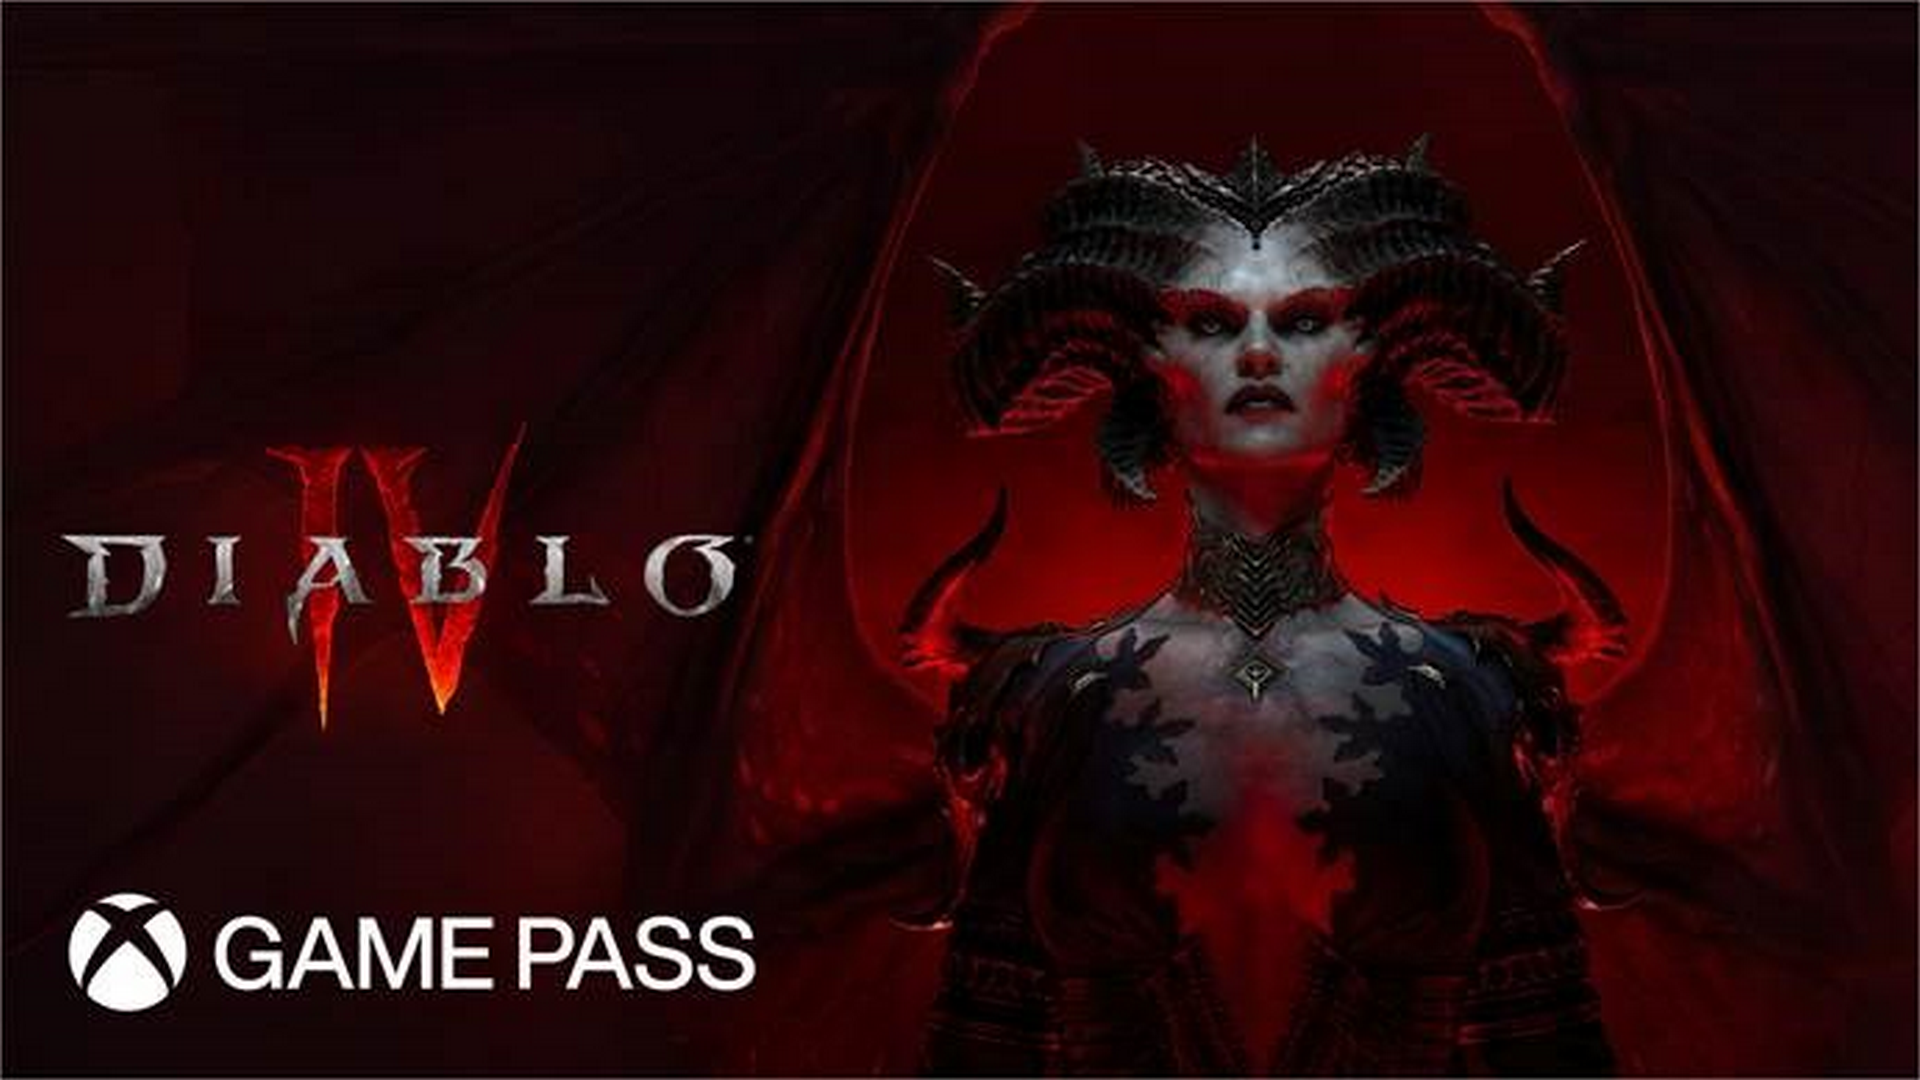 Diablo IV – Coming To Xbox Game Pass On March 28th